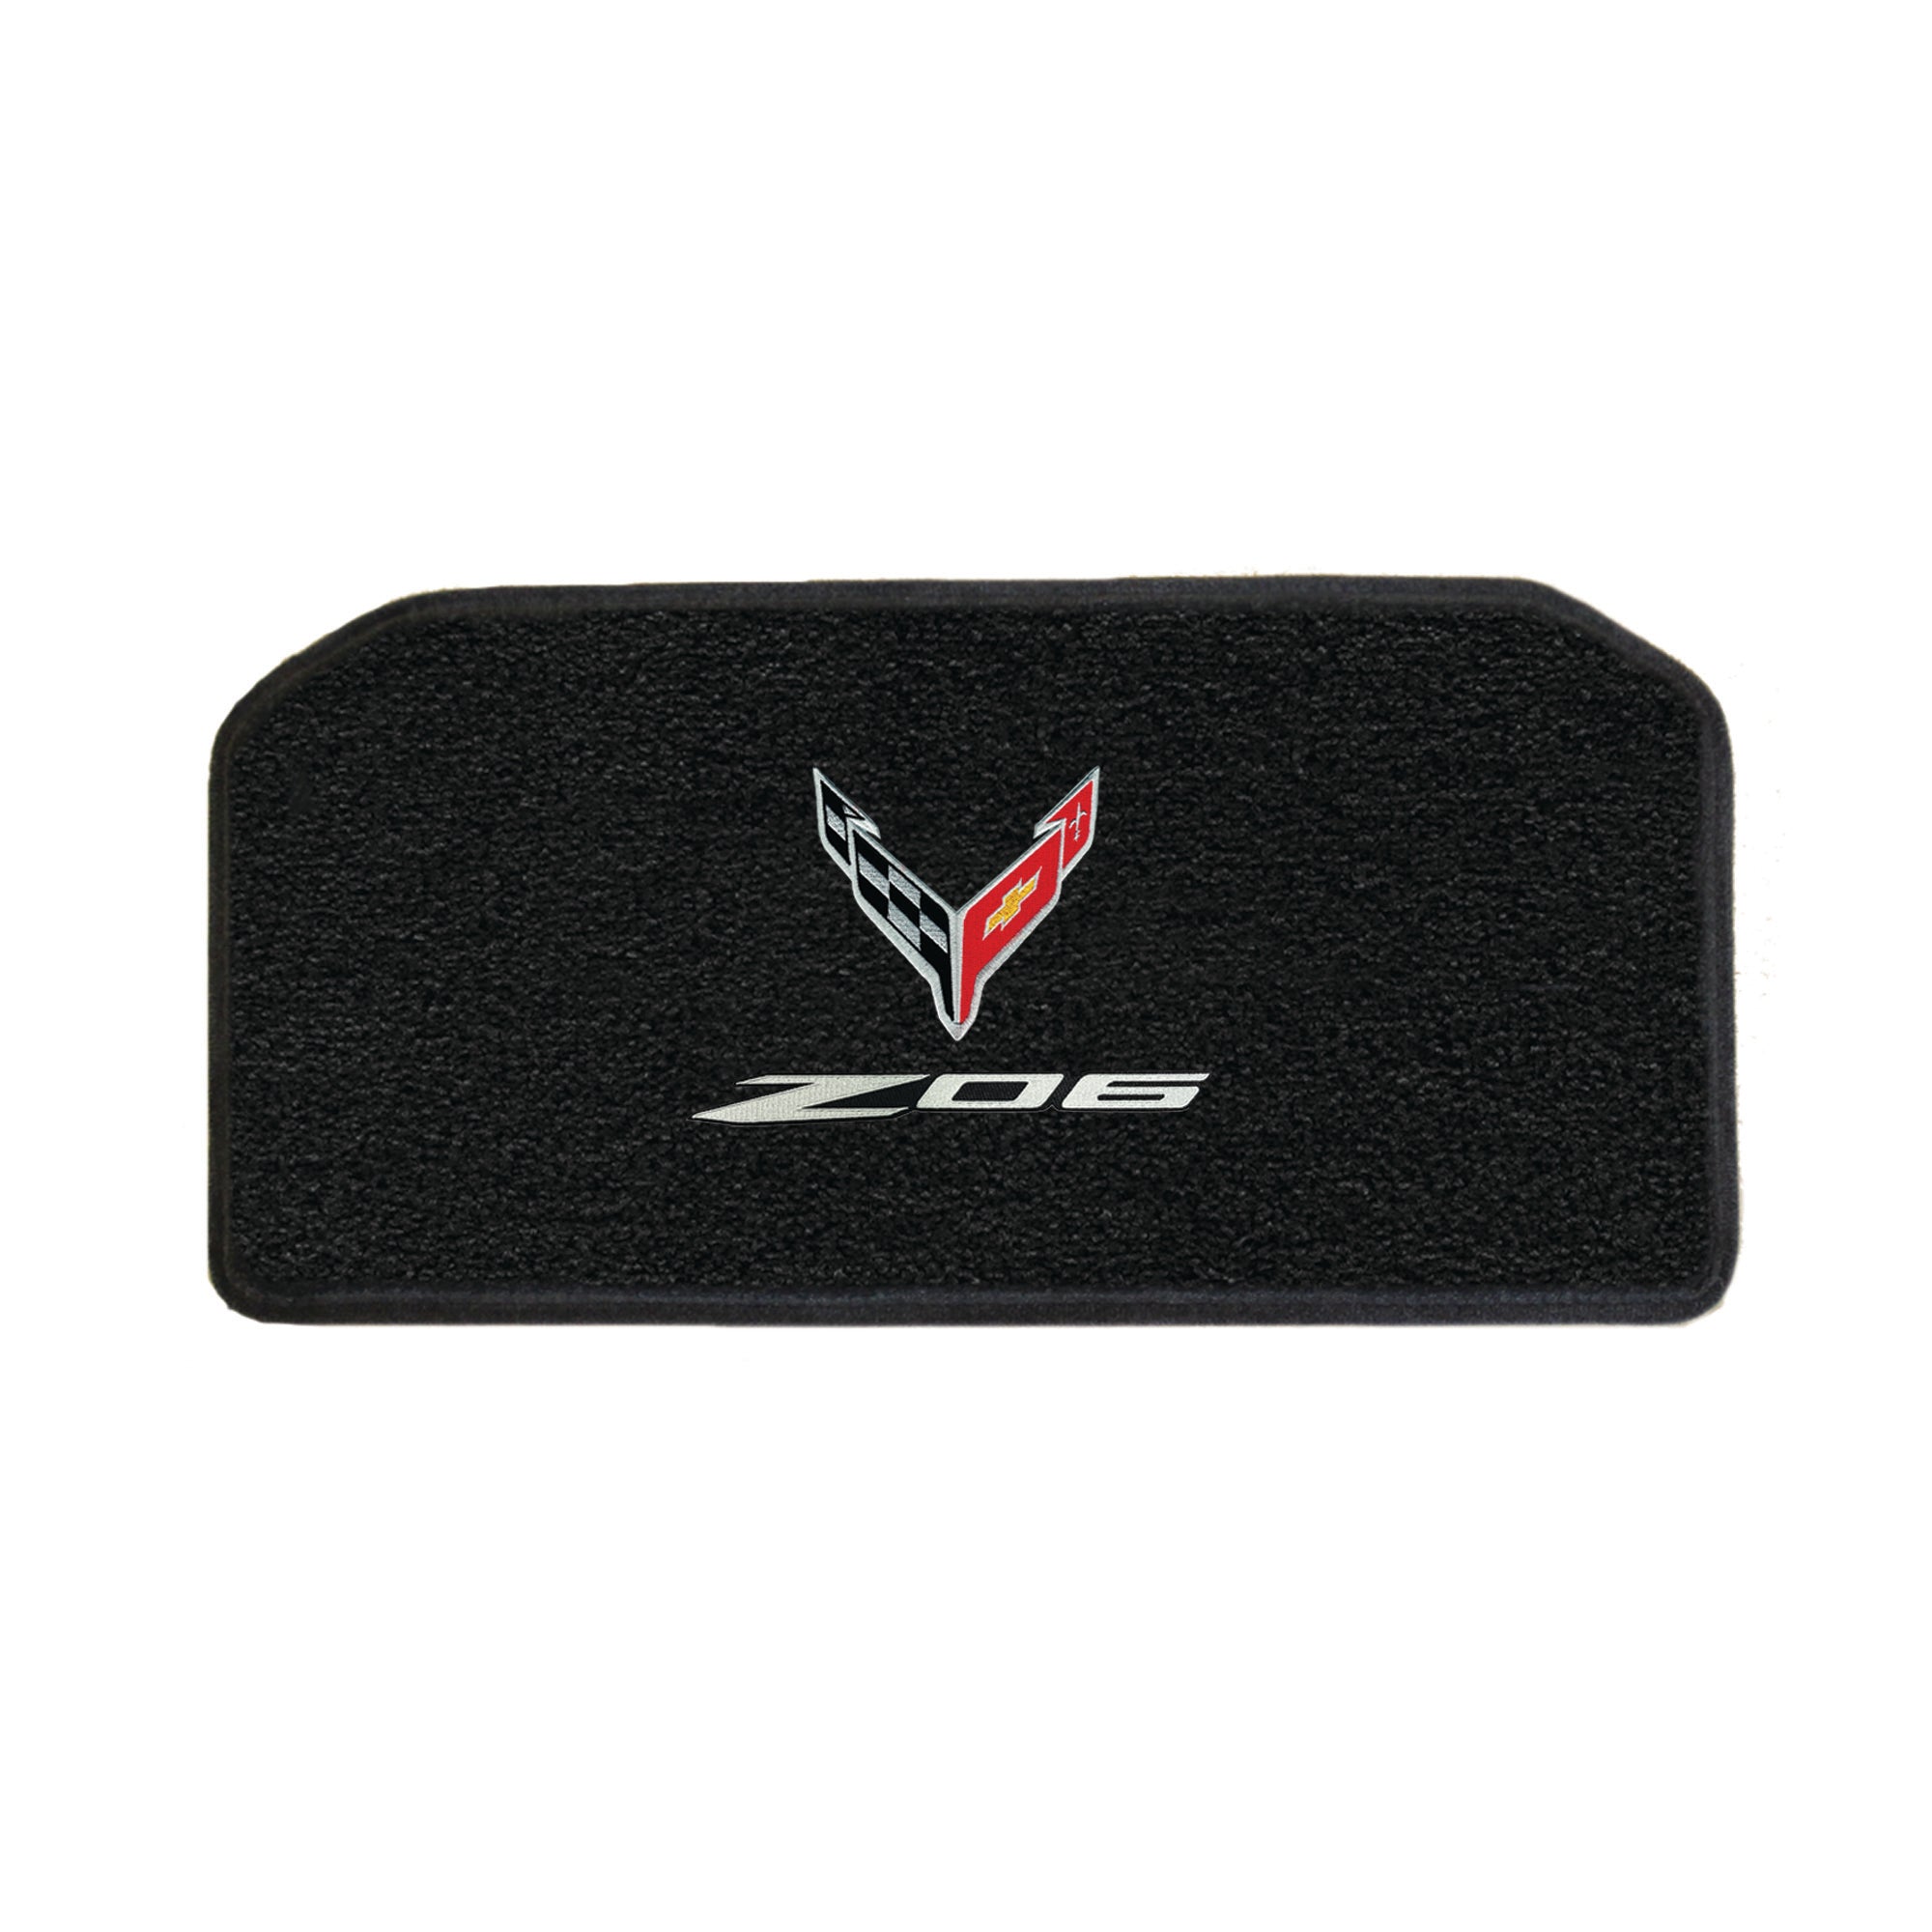 C8/Z06 Corvette Front Cargo Mats - Lloyds Mats with C8 Crossed Flags Over Z06 Logo